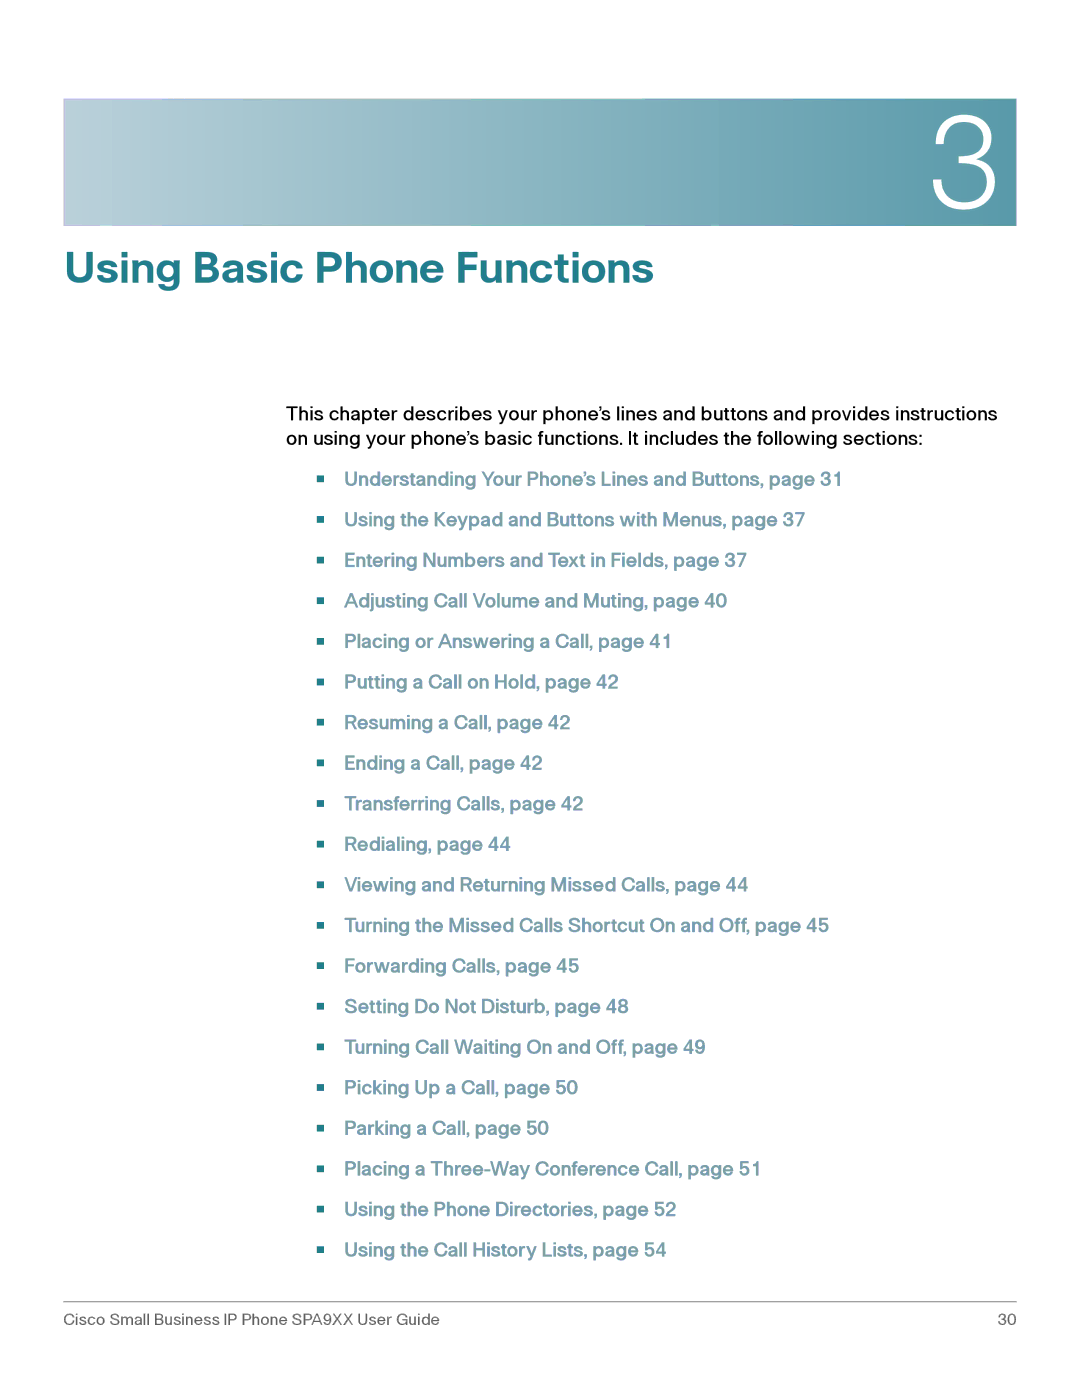 Cisco Systems SPA92X, SPA962, SPA94X manual Using Basic Phone Functions 